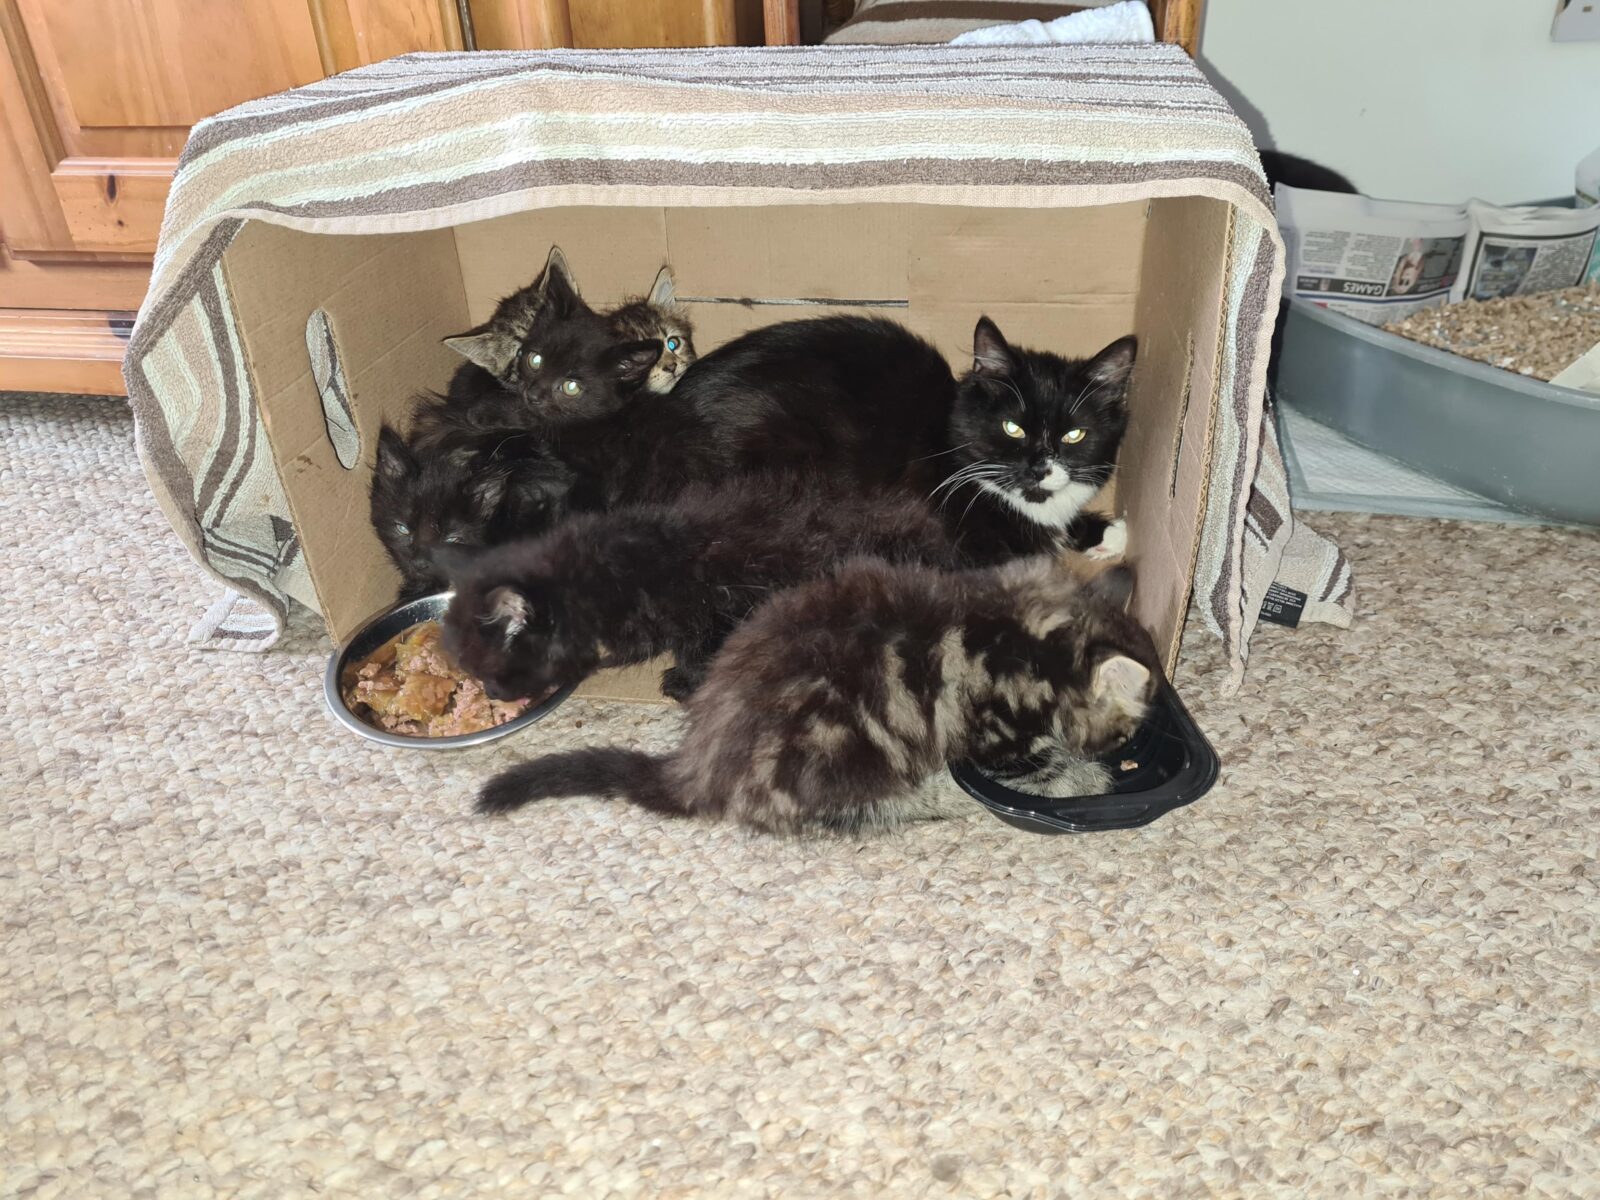 The kittens and cats after being rescued from the washing basket